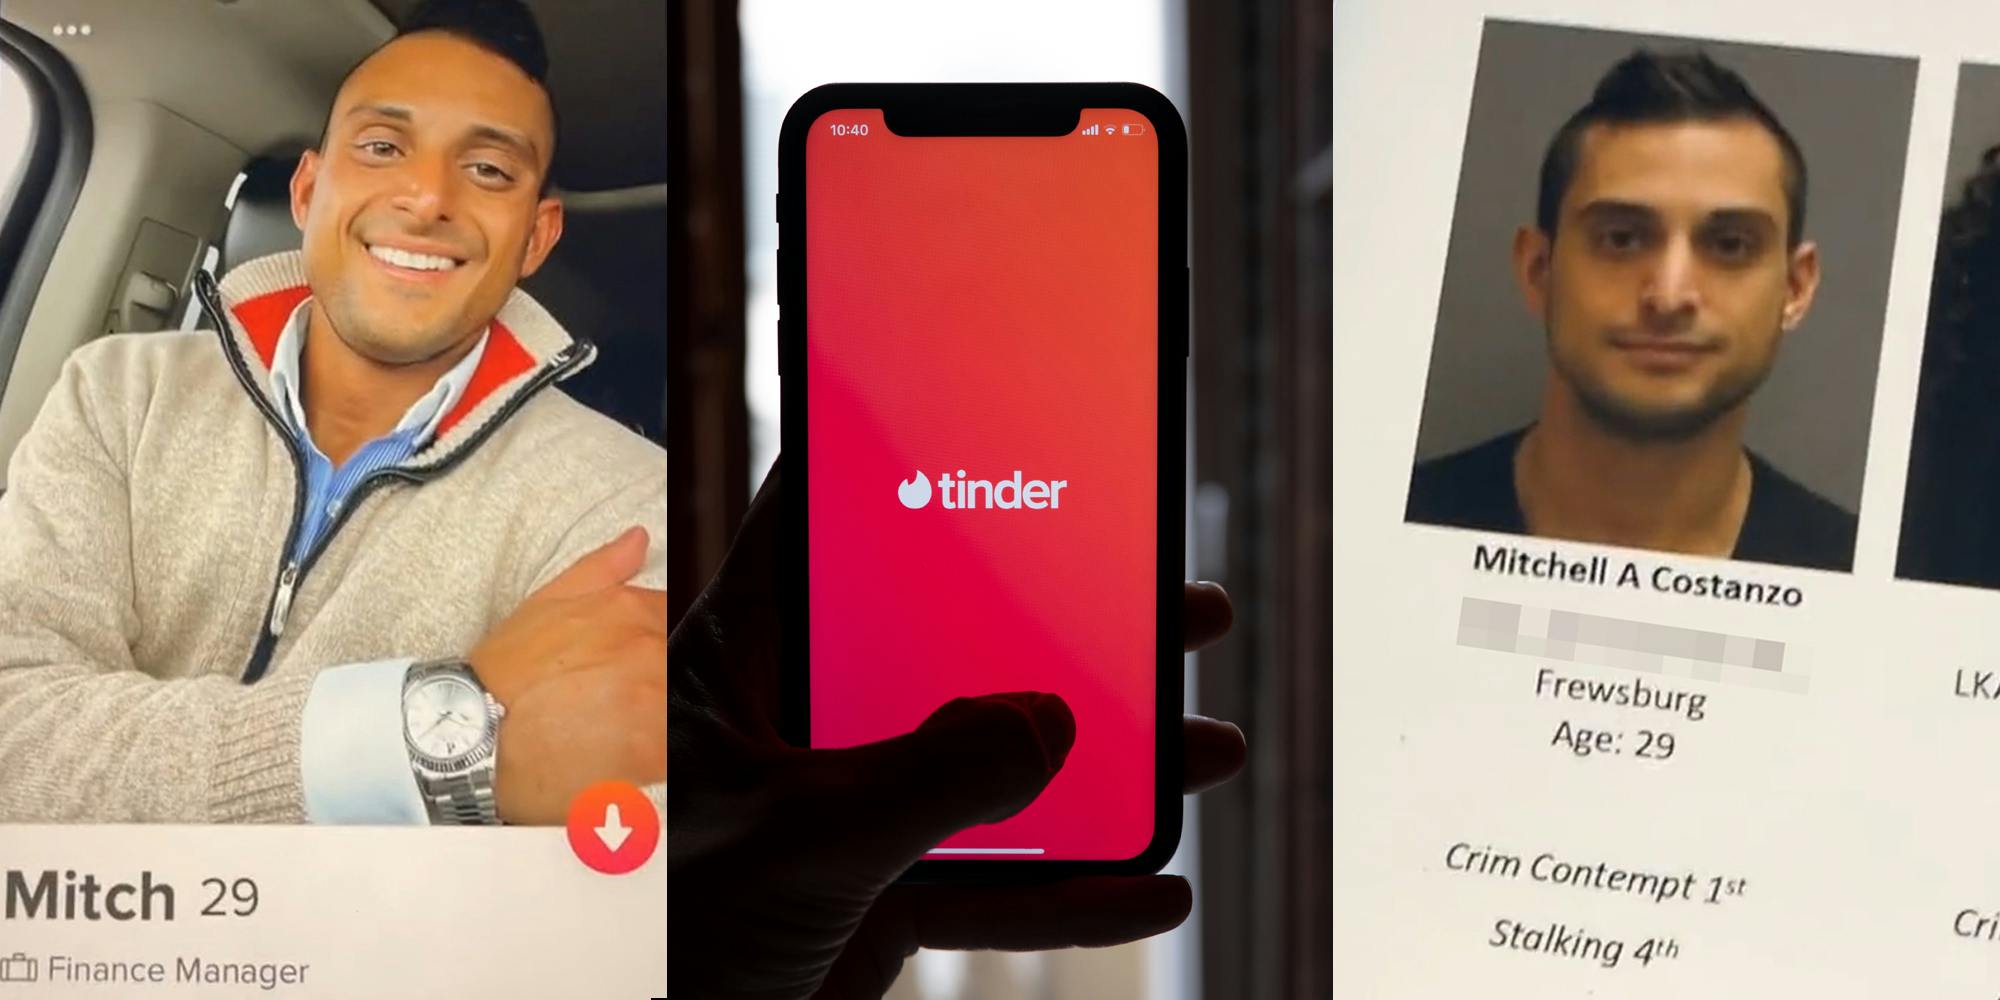 Man Tinder profile "Mitch" (l) hand holding phone with Tinder on screen (c) man on Wanted list "Mitchell A Costanzo Crim Contempr 1st Stalking 4th" (r)